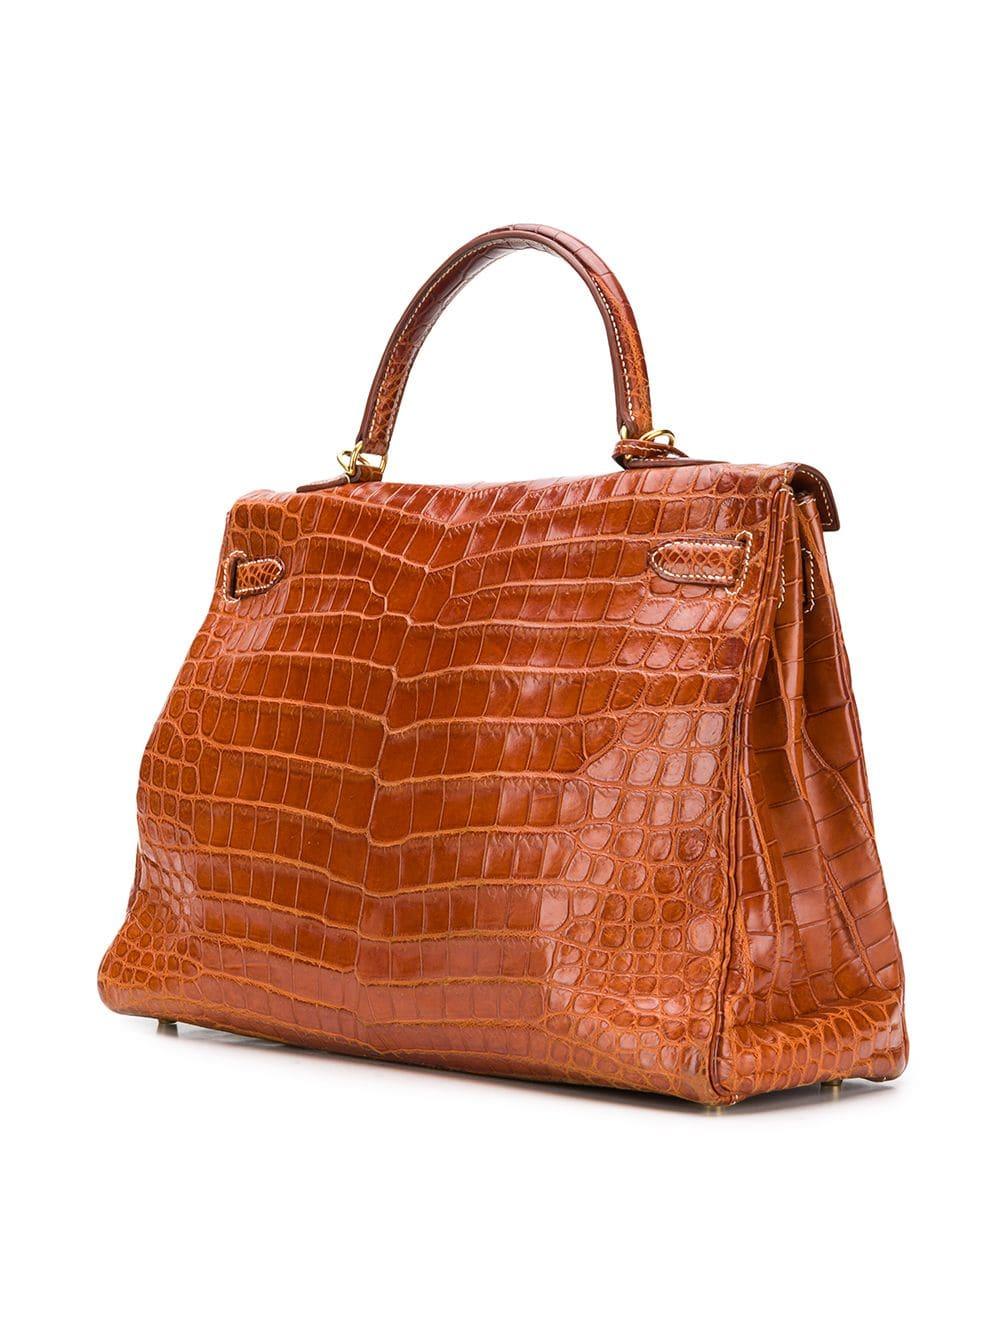 Treat yourself to This extremely rare, Niloticus Crocodile Hermès Kelly bag which comes presented in a unique and extremely sought after shiny Miel Brown colour. A true testament to the quality of the house's craftsmanship, exuding timeless style